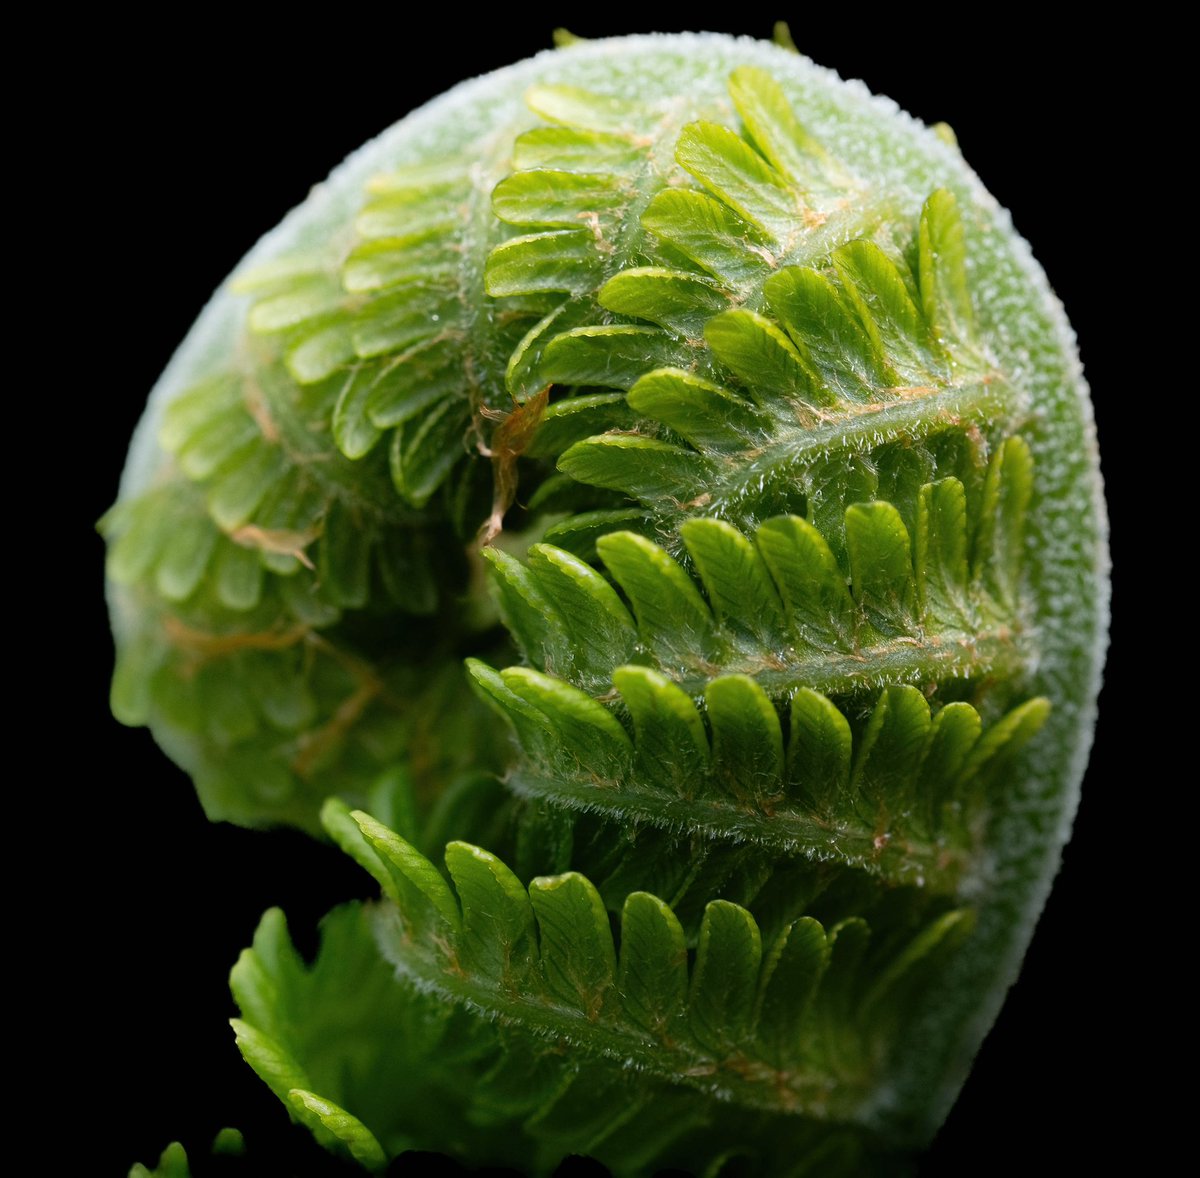 @WLH1972 Love the simplicity of this fern frond #SundaySharing